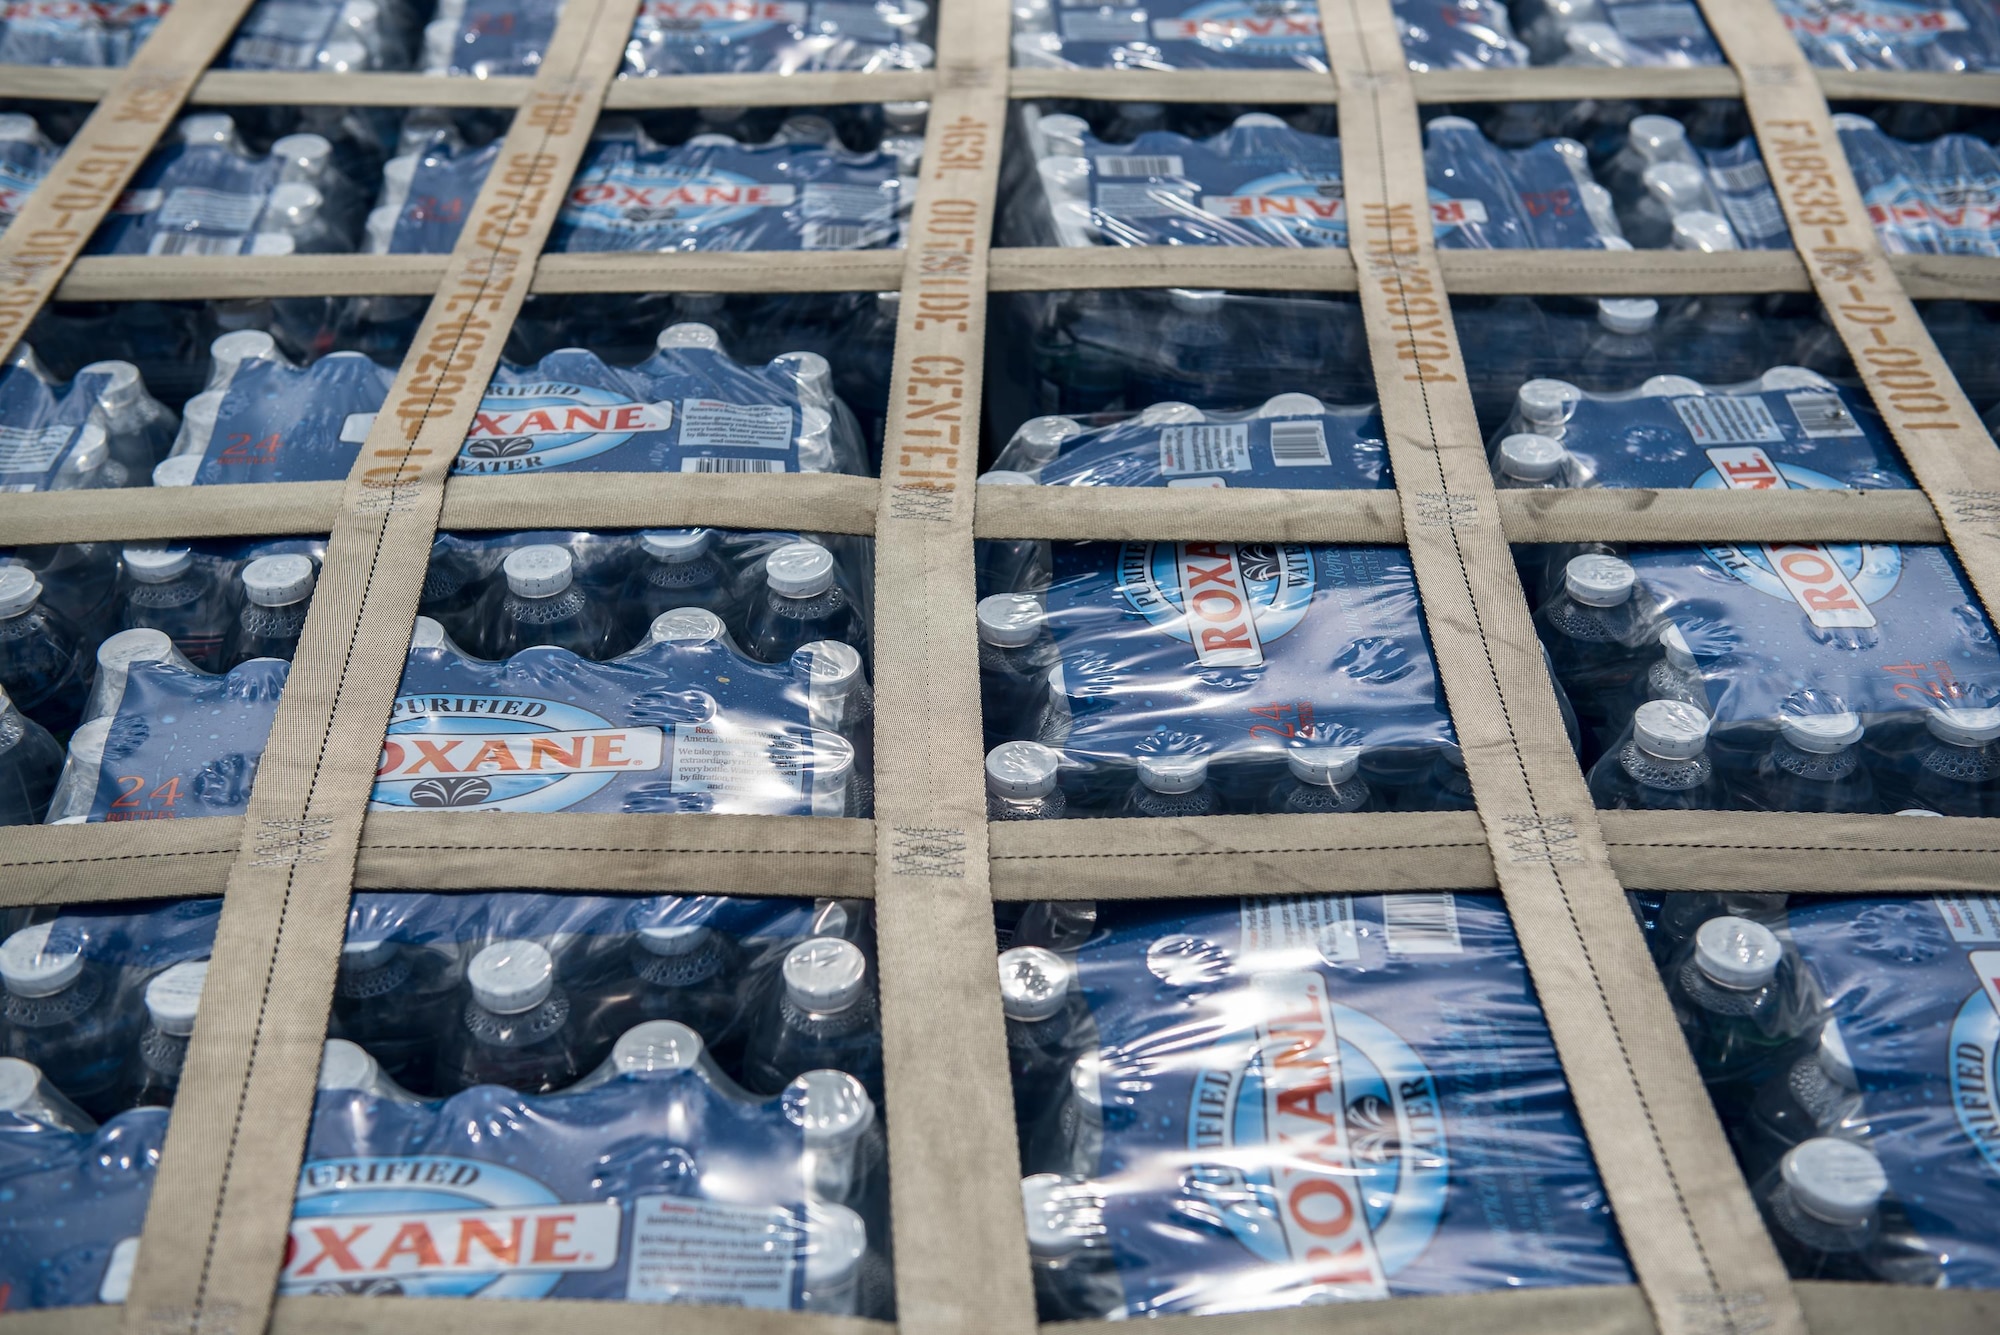 Pallets of water are among the 7.2 million pounds of cargo processed through an aerial port of debarkation at Luis Muñoz Marín International Airport in San Juan, Puerto Rico, on Oct. 6, 2017, following Hurricane Maria. The port is staffed by 39 members of the Kentucky Air National Guard’s 123rd Contingency Response Group, augmented by Airmen from the active-duty Air Force and Air National Guard units in multiple states. (U.S. Air National Guard photo by Lt. Col. Dale Greer)